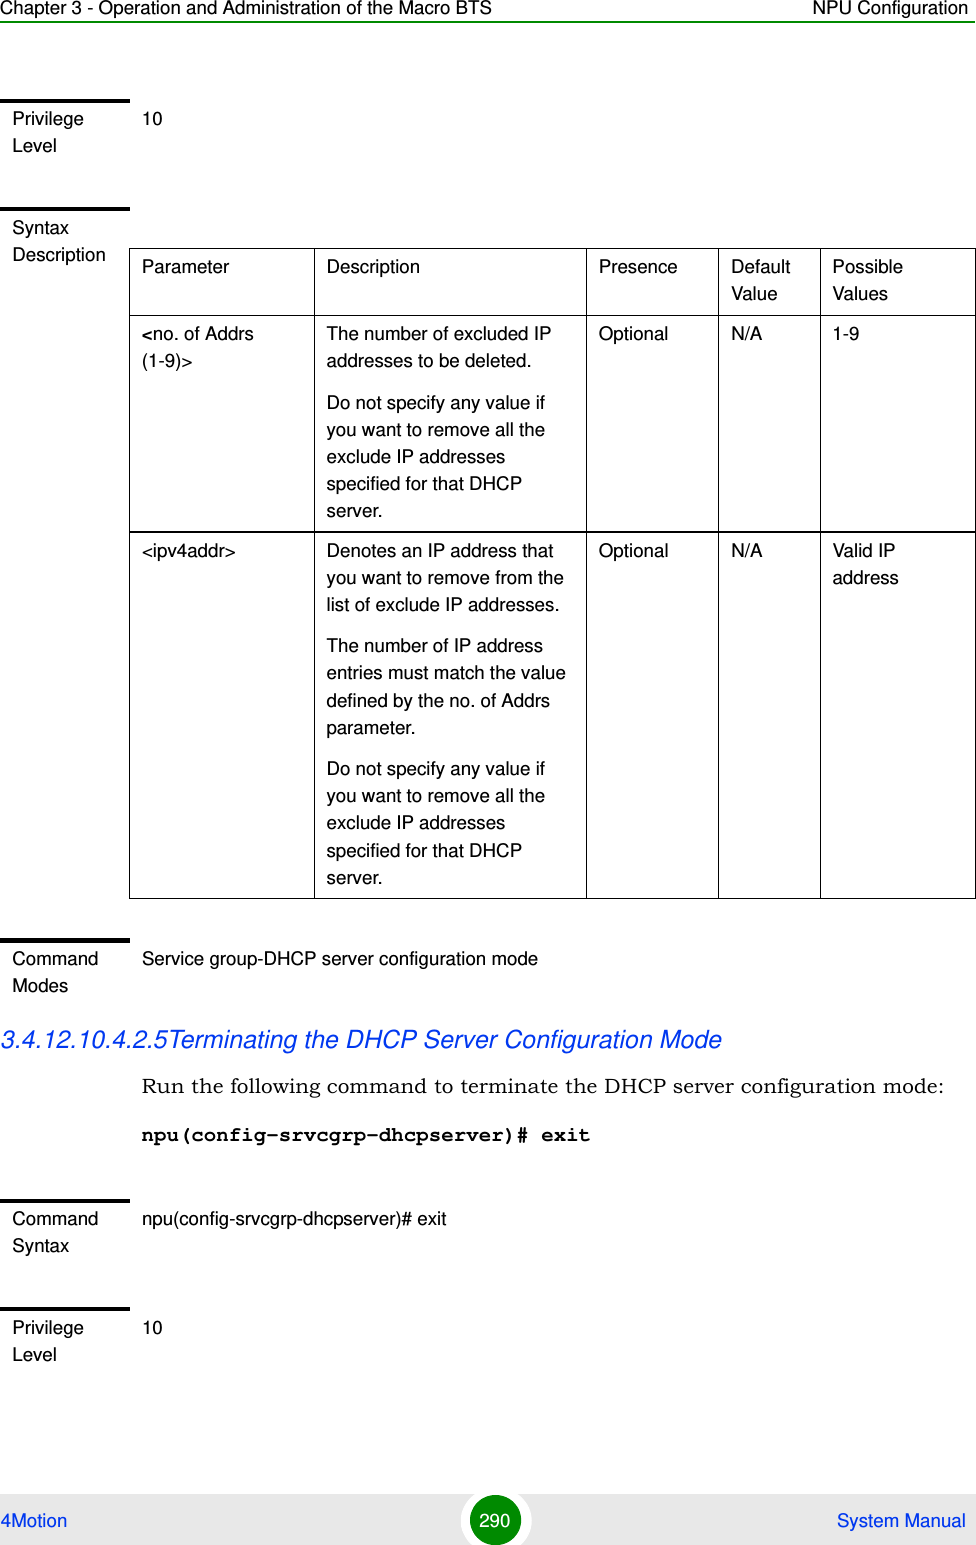 Chapter 3 - Operation and Administration of the Macro BTS NPU Configuration4Motion 290  System Manual3.4.12.10.4.2.5Terminating the DHCP Server Configuration ModeRun the following command to terminate the DHCP server configuration mode: npu(config-srvcgrp-dhcpserver)# exitPrivilege Level10Syntax Description Parameter Description Presence Default ValuePossible Values&lt;no. of Addrs (1-9)&gt;The number of excluded IP addresses to be deleted.Do not specify any value if you want to remove all the exclude IP addresses specified for that DHCP server.Optional N/A 1-9&lt;ipv4addr&gt; Denotes an IP address that you want to remove from the list of exclude IP addresses. The number of IP address entries must match the value defined by the no. of Addrs parameter.Do not specify any value if you want to remove all the exclude IP addresses specified for that DHCP server.Optional N/A Valid IP addressCommand ModesService group-DHCP server configuration modeCommand Syntaxnpu(config-srvcgrp-dhcpserver)# exitPrivilege Level10